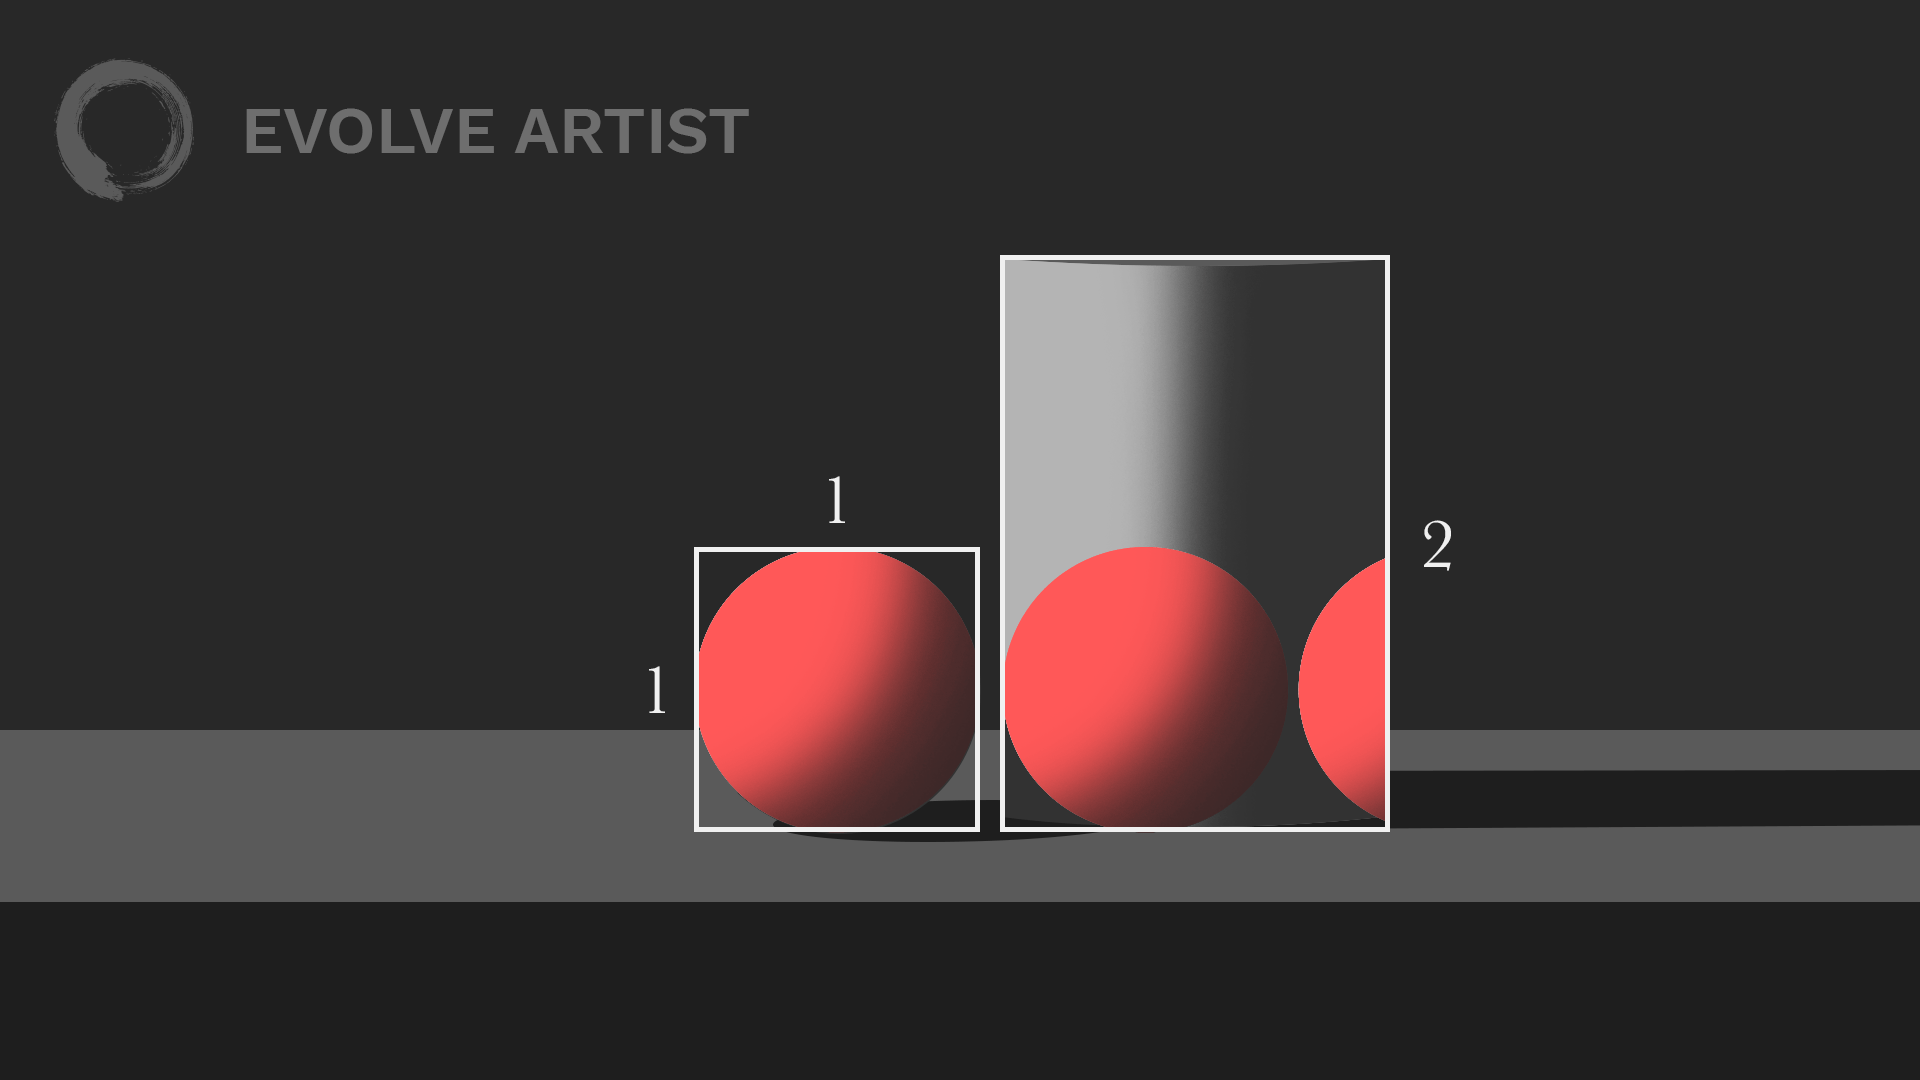 Calculating relative measurements can keep the proportions of objects in an image accurate.